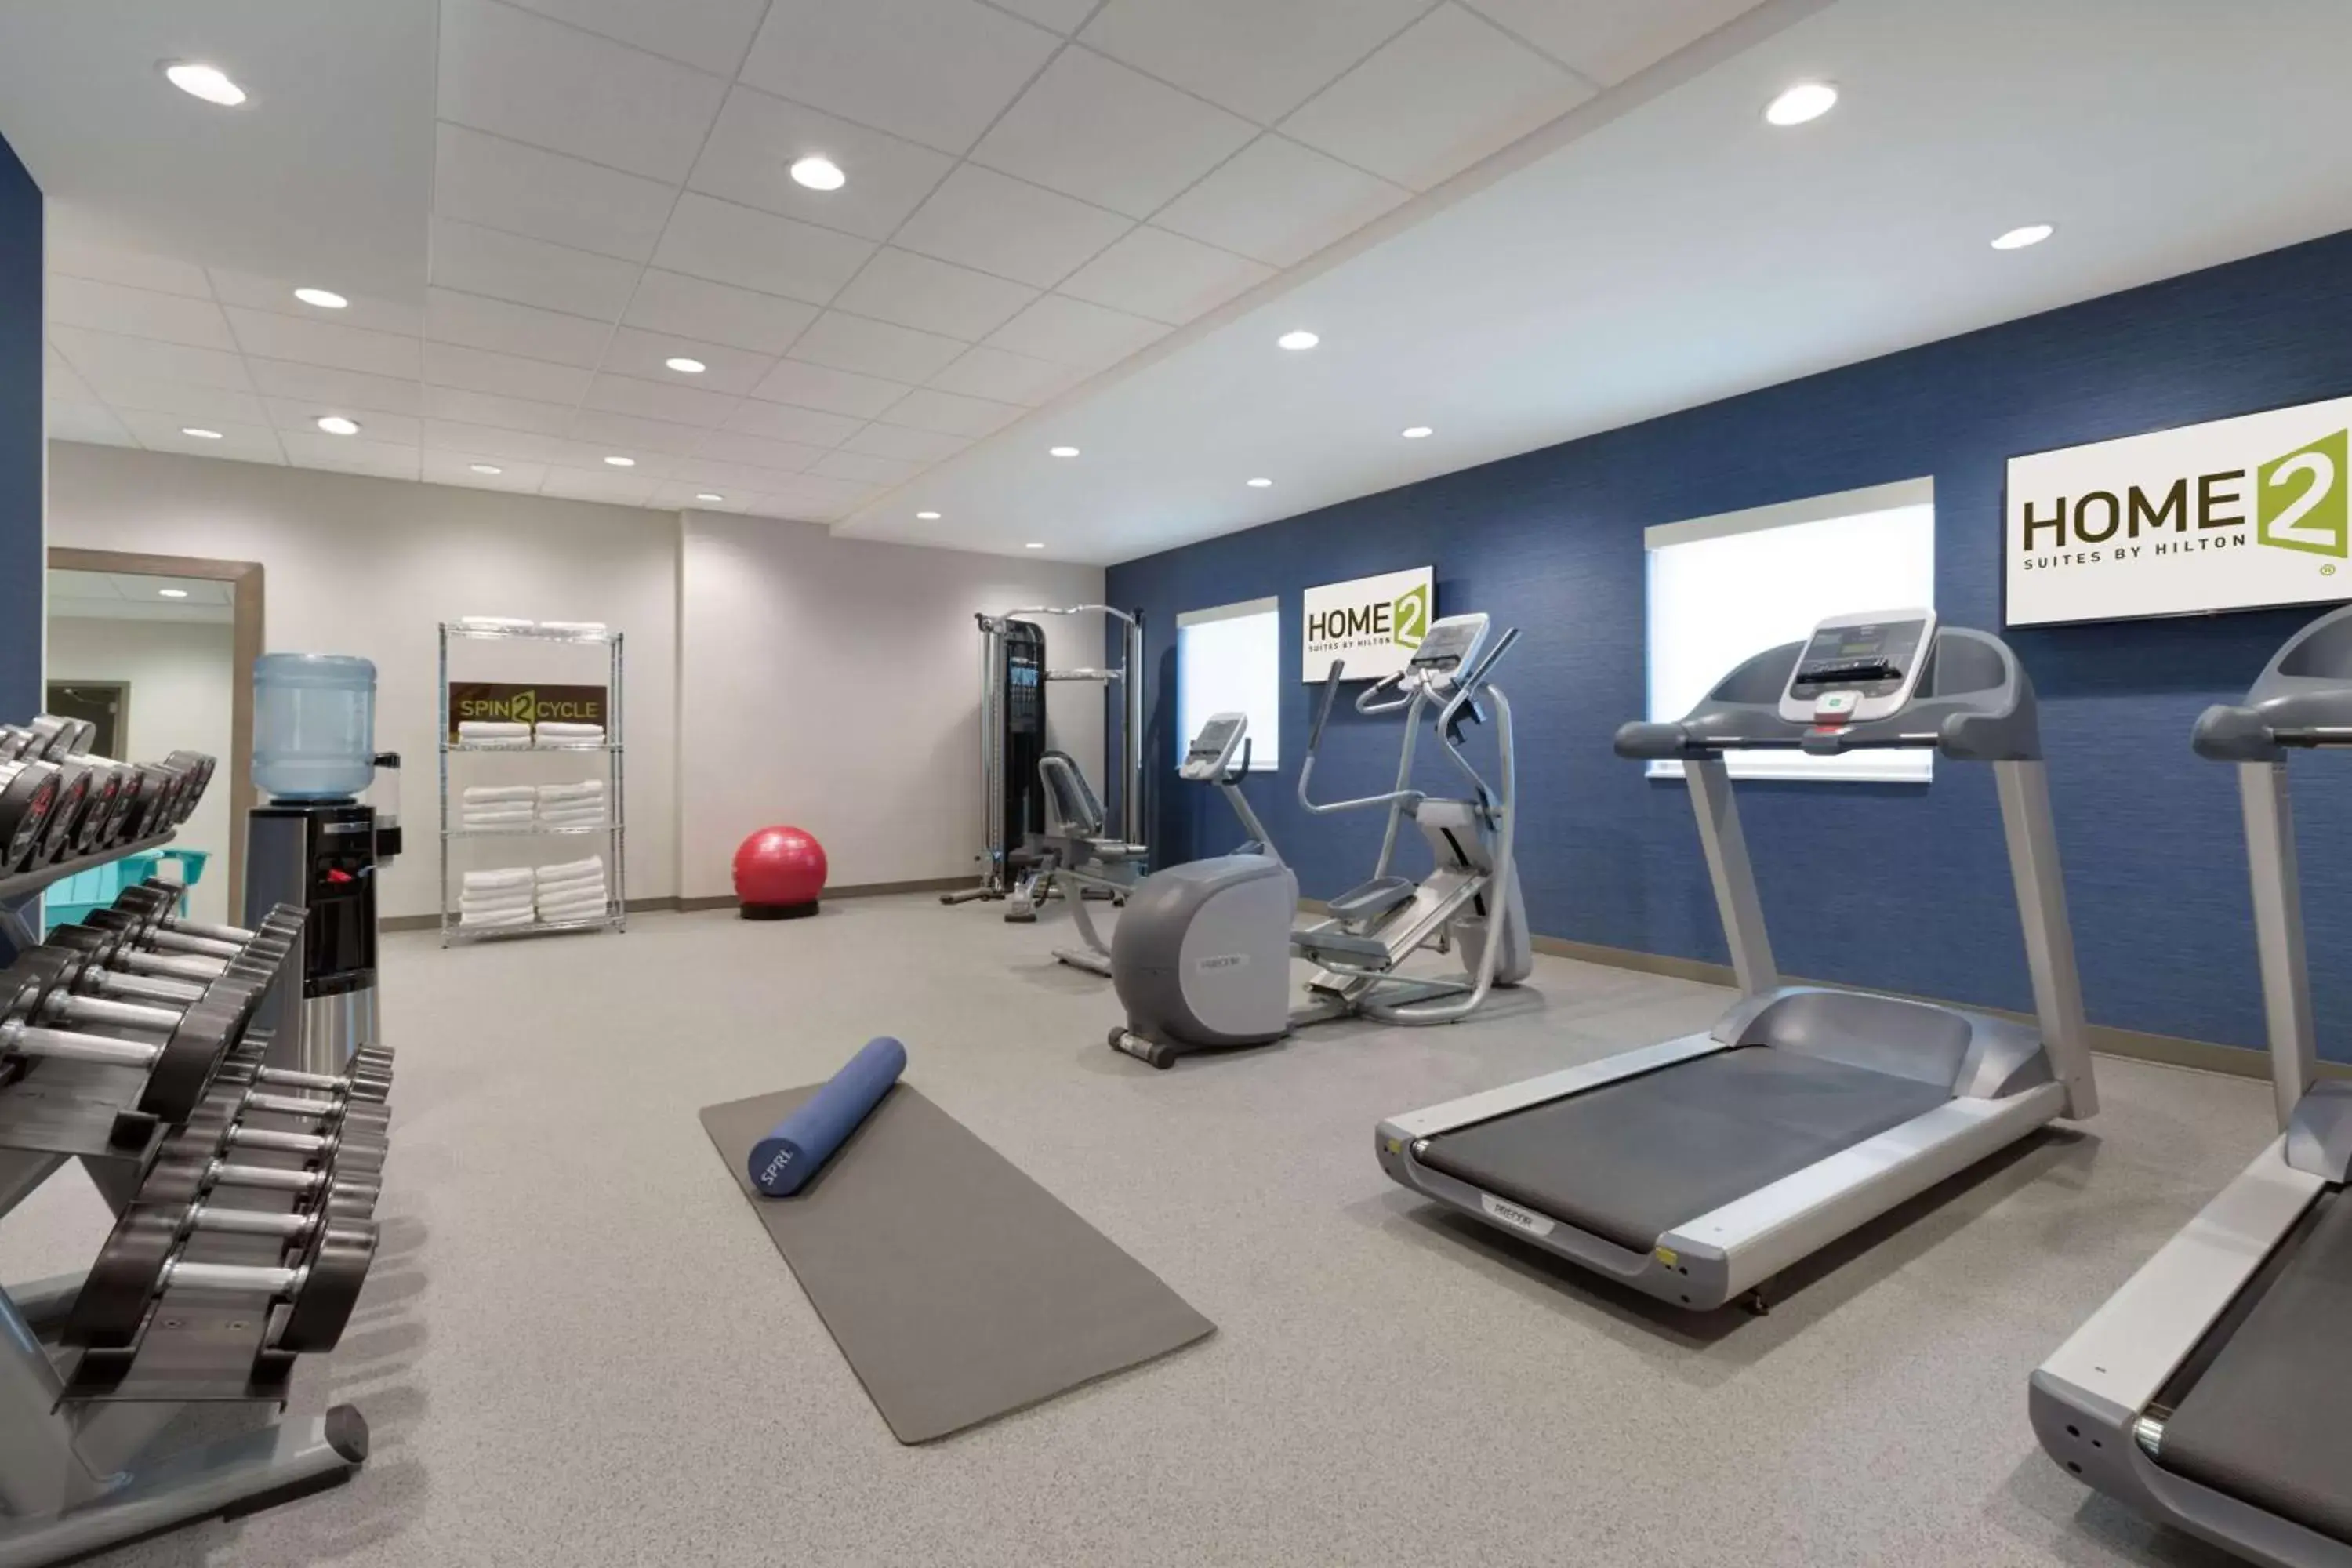 Fitness centre/facilities, Fitness Center/Facilities in Home2 Suites By Hilton Billings